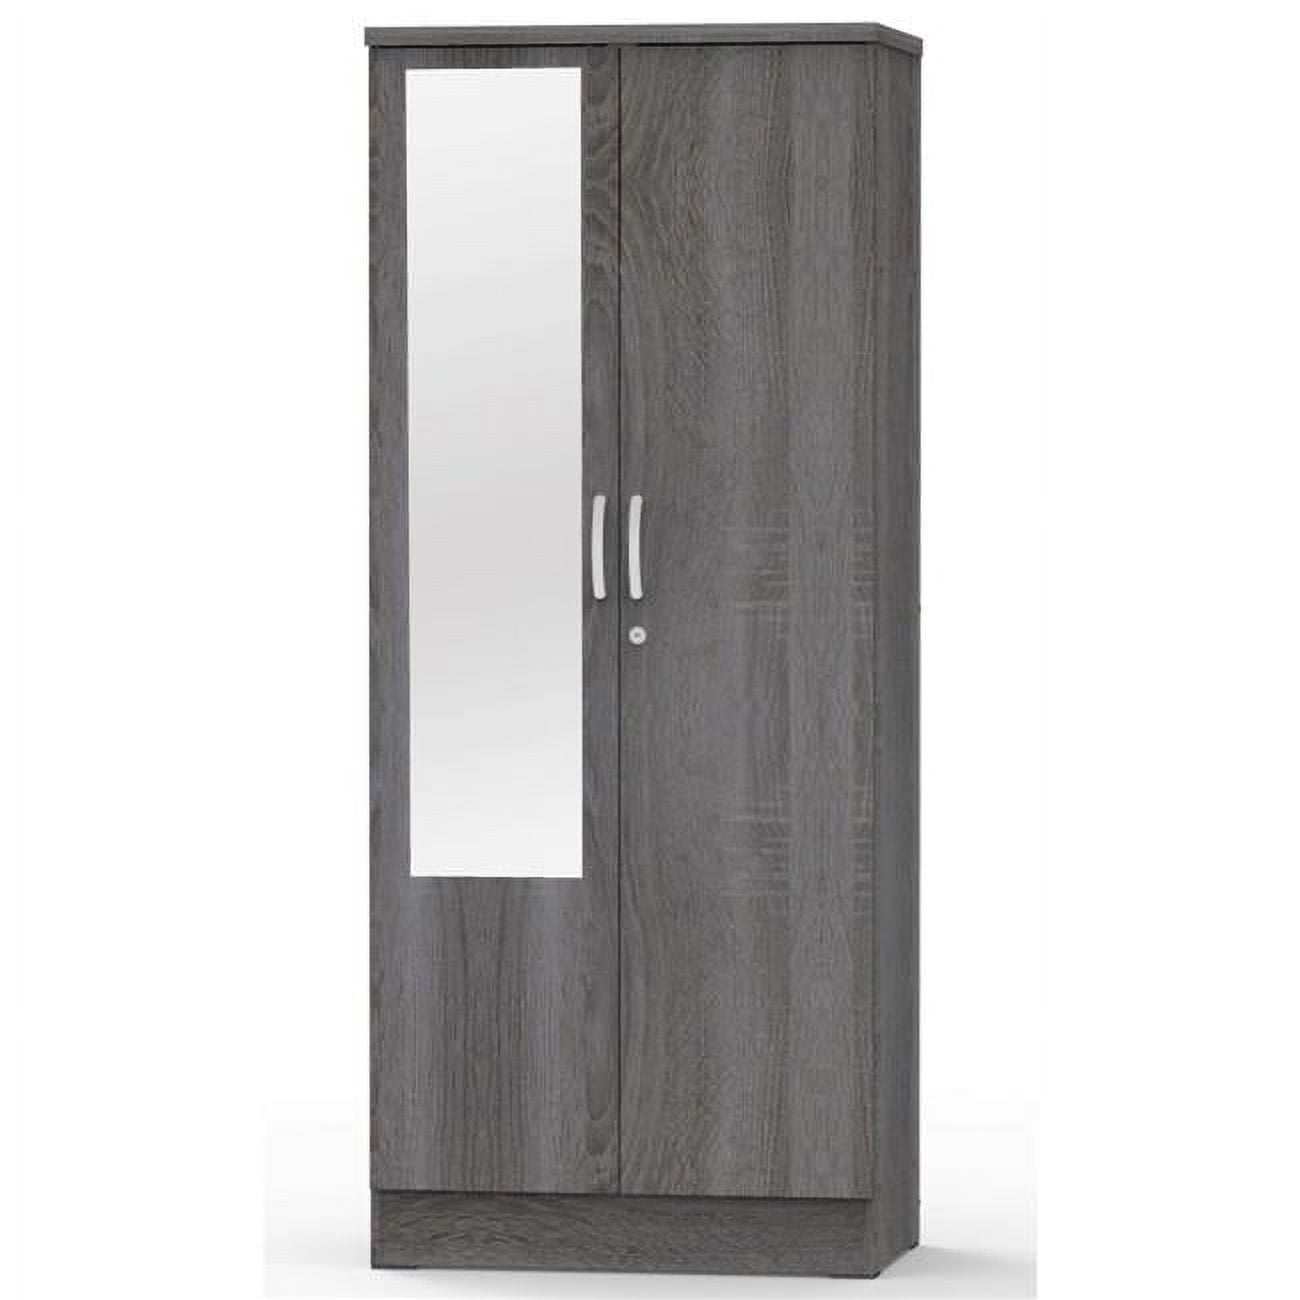 Picture of Better Home Products NW104-M-GRY Harmony Two Door Armoire Wardrobe Cabinet with Mirror, Gray